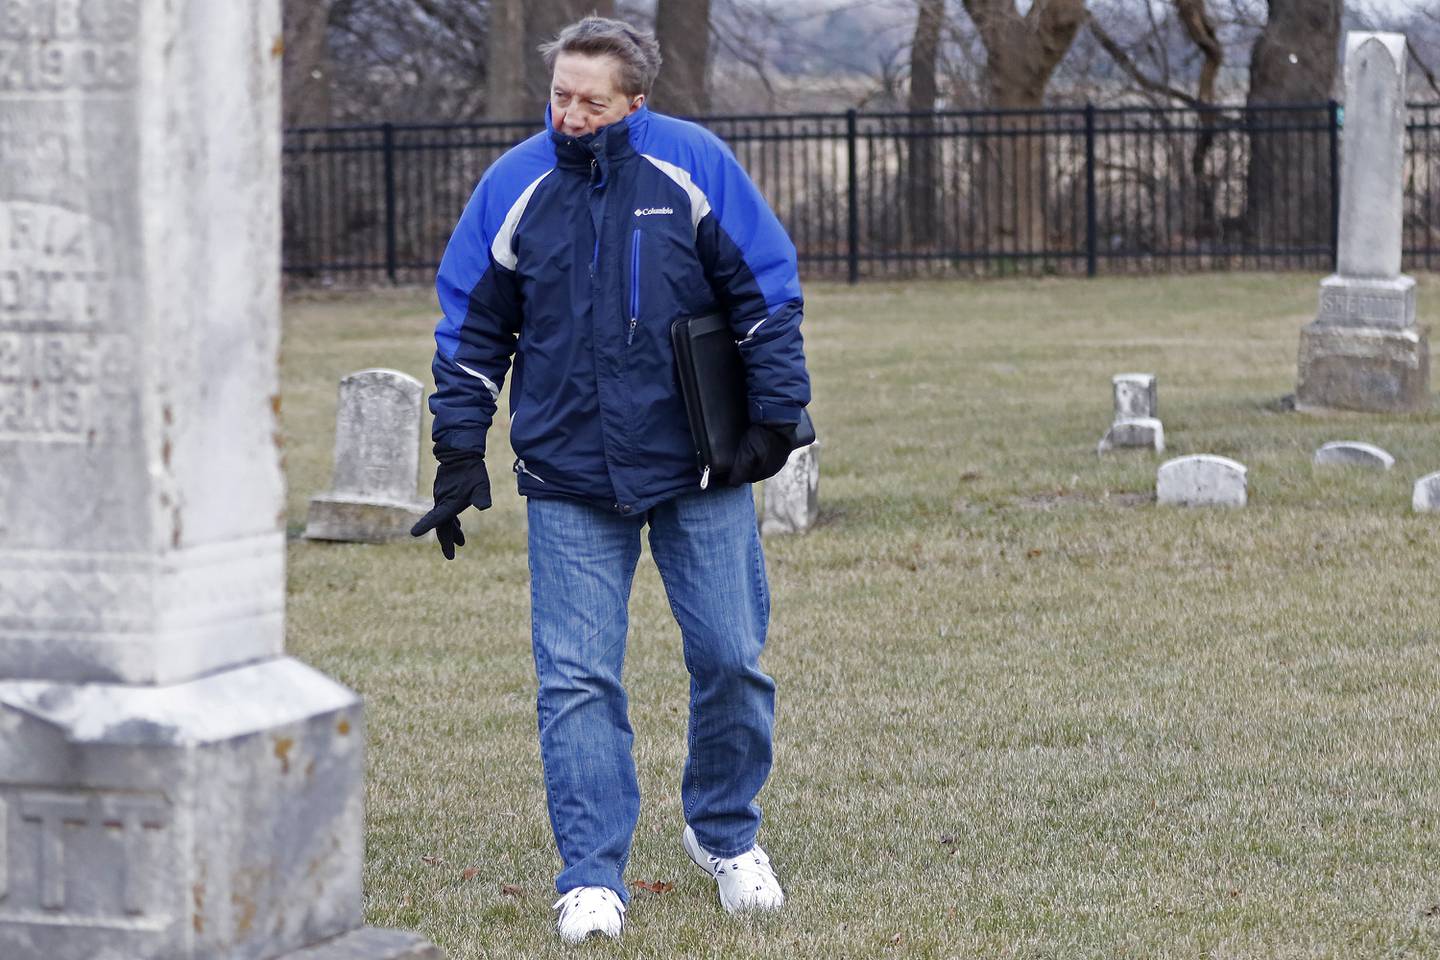 Doug Peterson, of McHenry, searches through Ostend Cemetery to find an unmarked burial plot on Tuesday, Dec. 21, 2021, in McHenry.  Peterson and Amanda Helma are working to identify the boy who died in 1963 and issue a headstone for him.